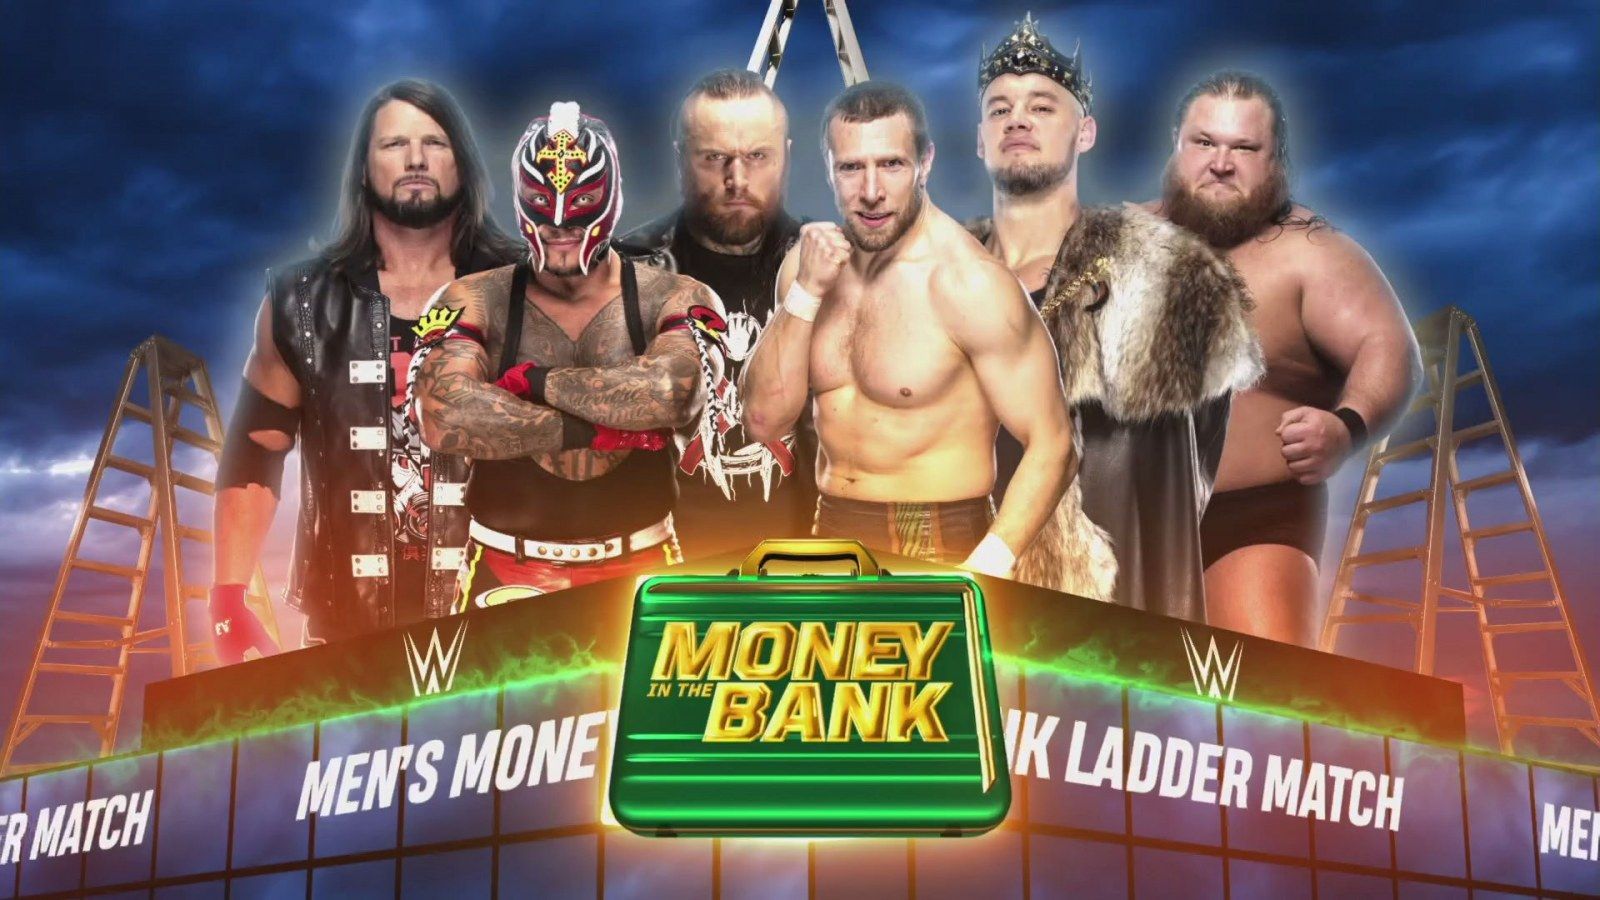 WWE 'Money in the Bank' 2020: Start Time, Betting Odds and How to Watch Online